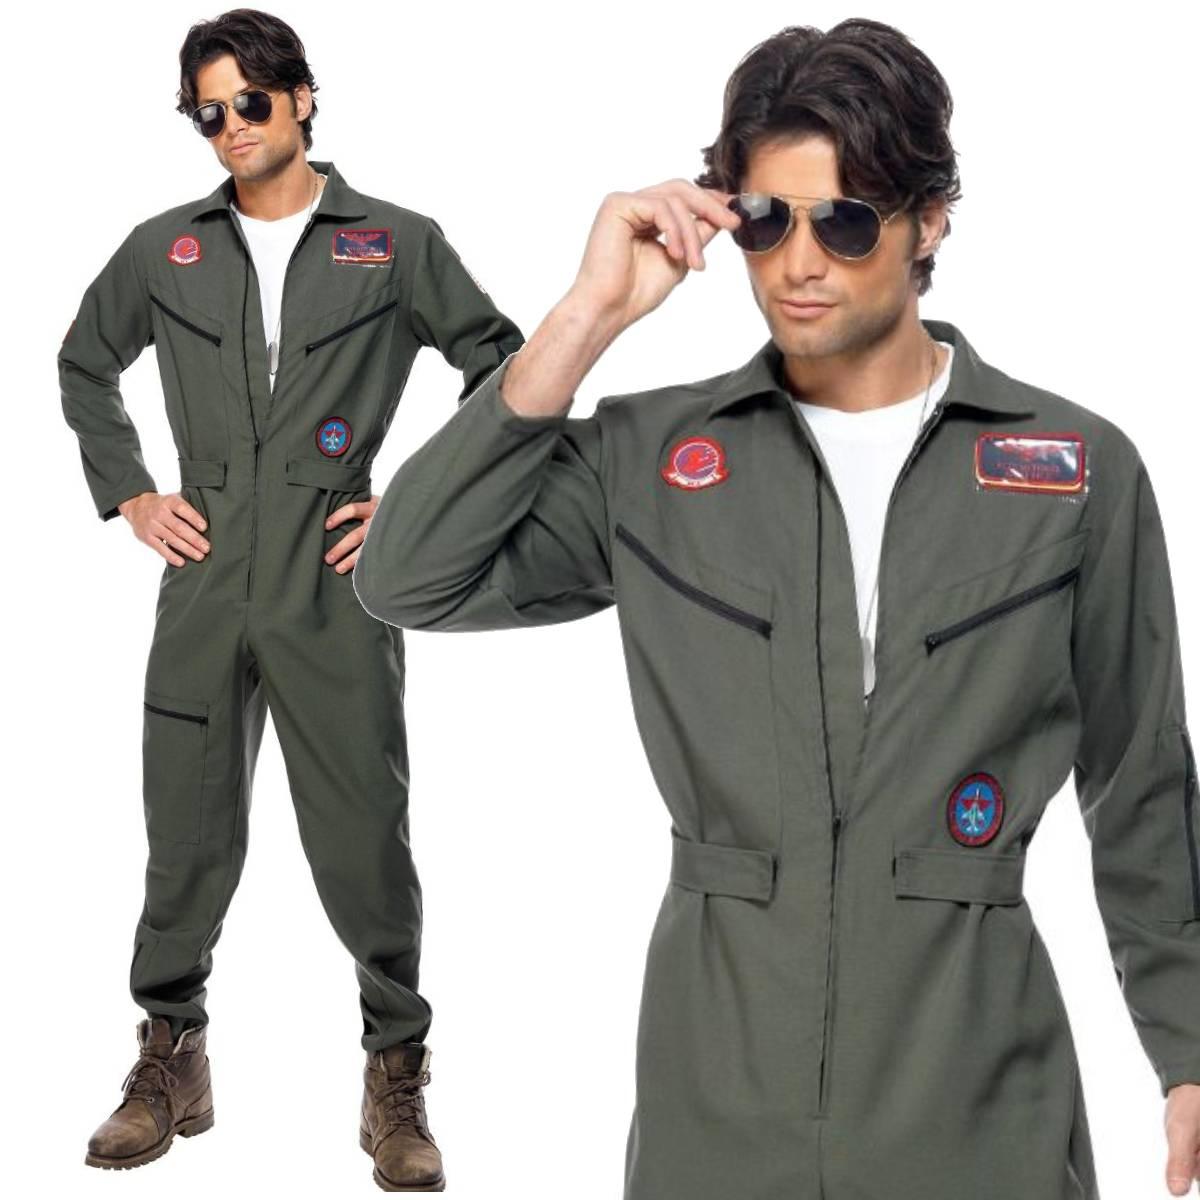 Official USAF Top Gun Pilot Costume by Smiffys 36287 available here at Karnival Costumes online party shop